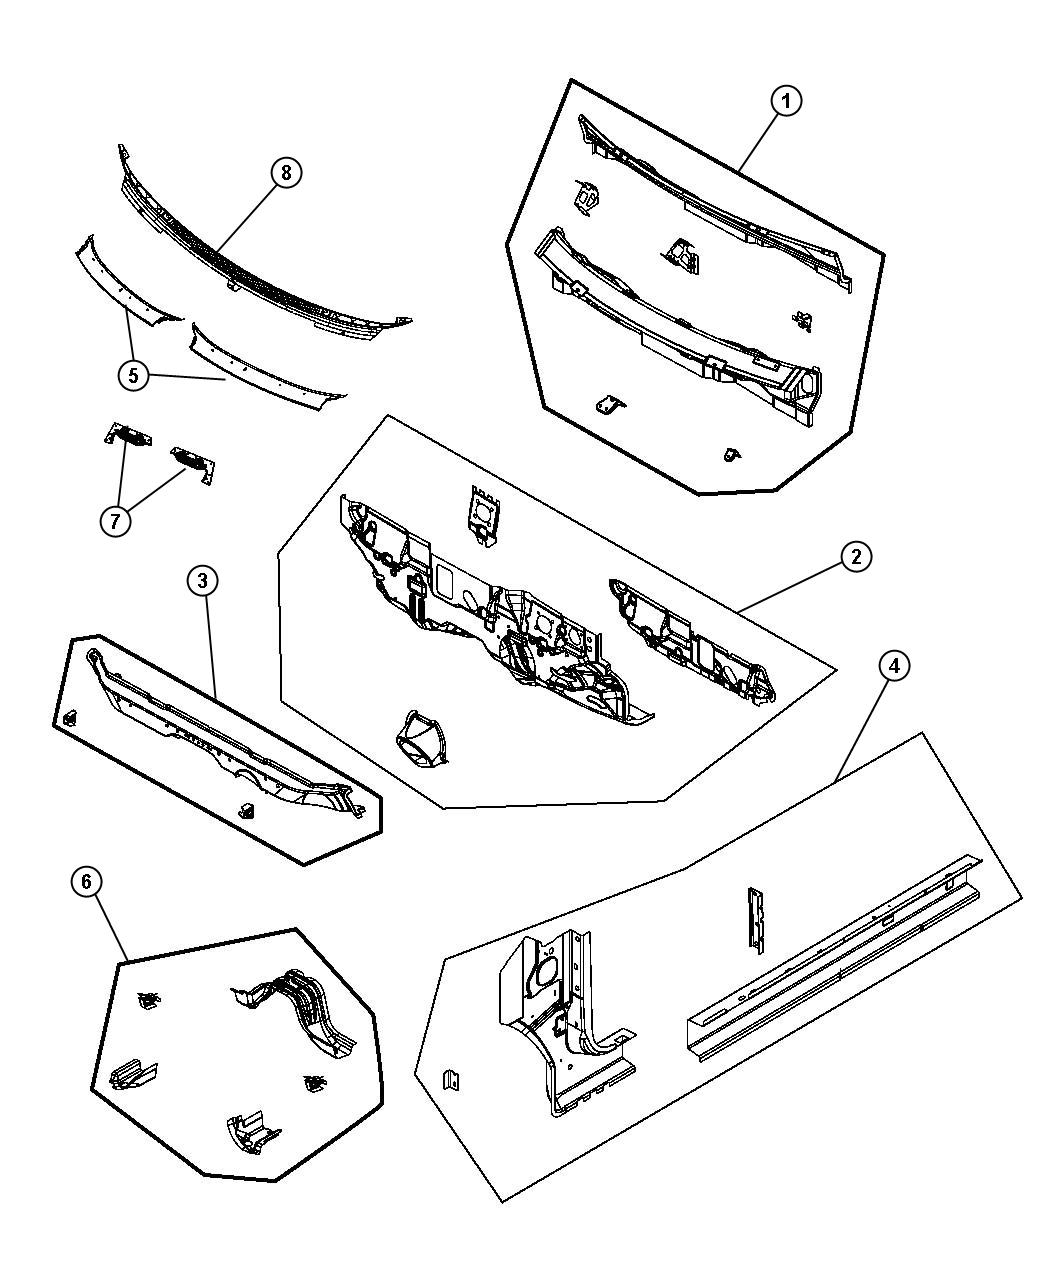 Cowl, Dash Panel, and Related Parts. Diagram